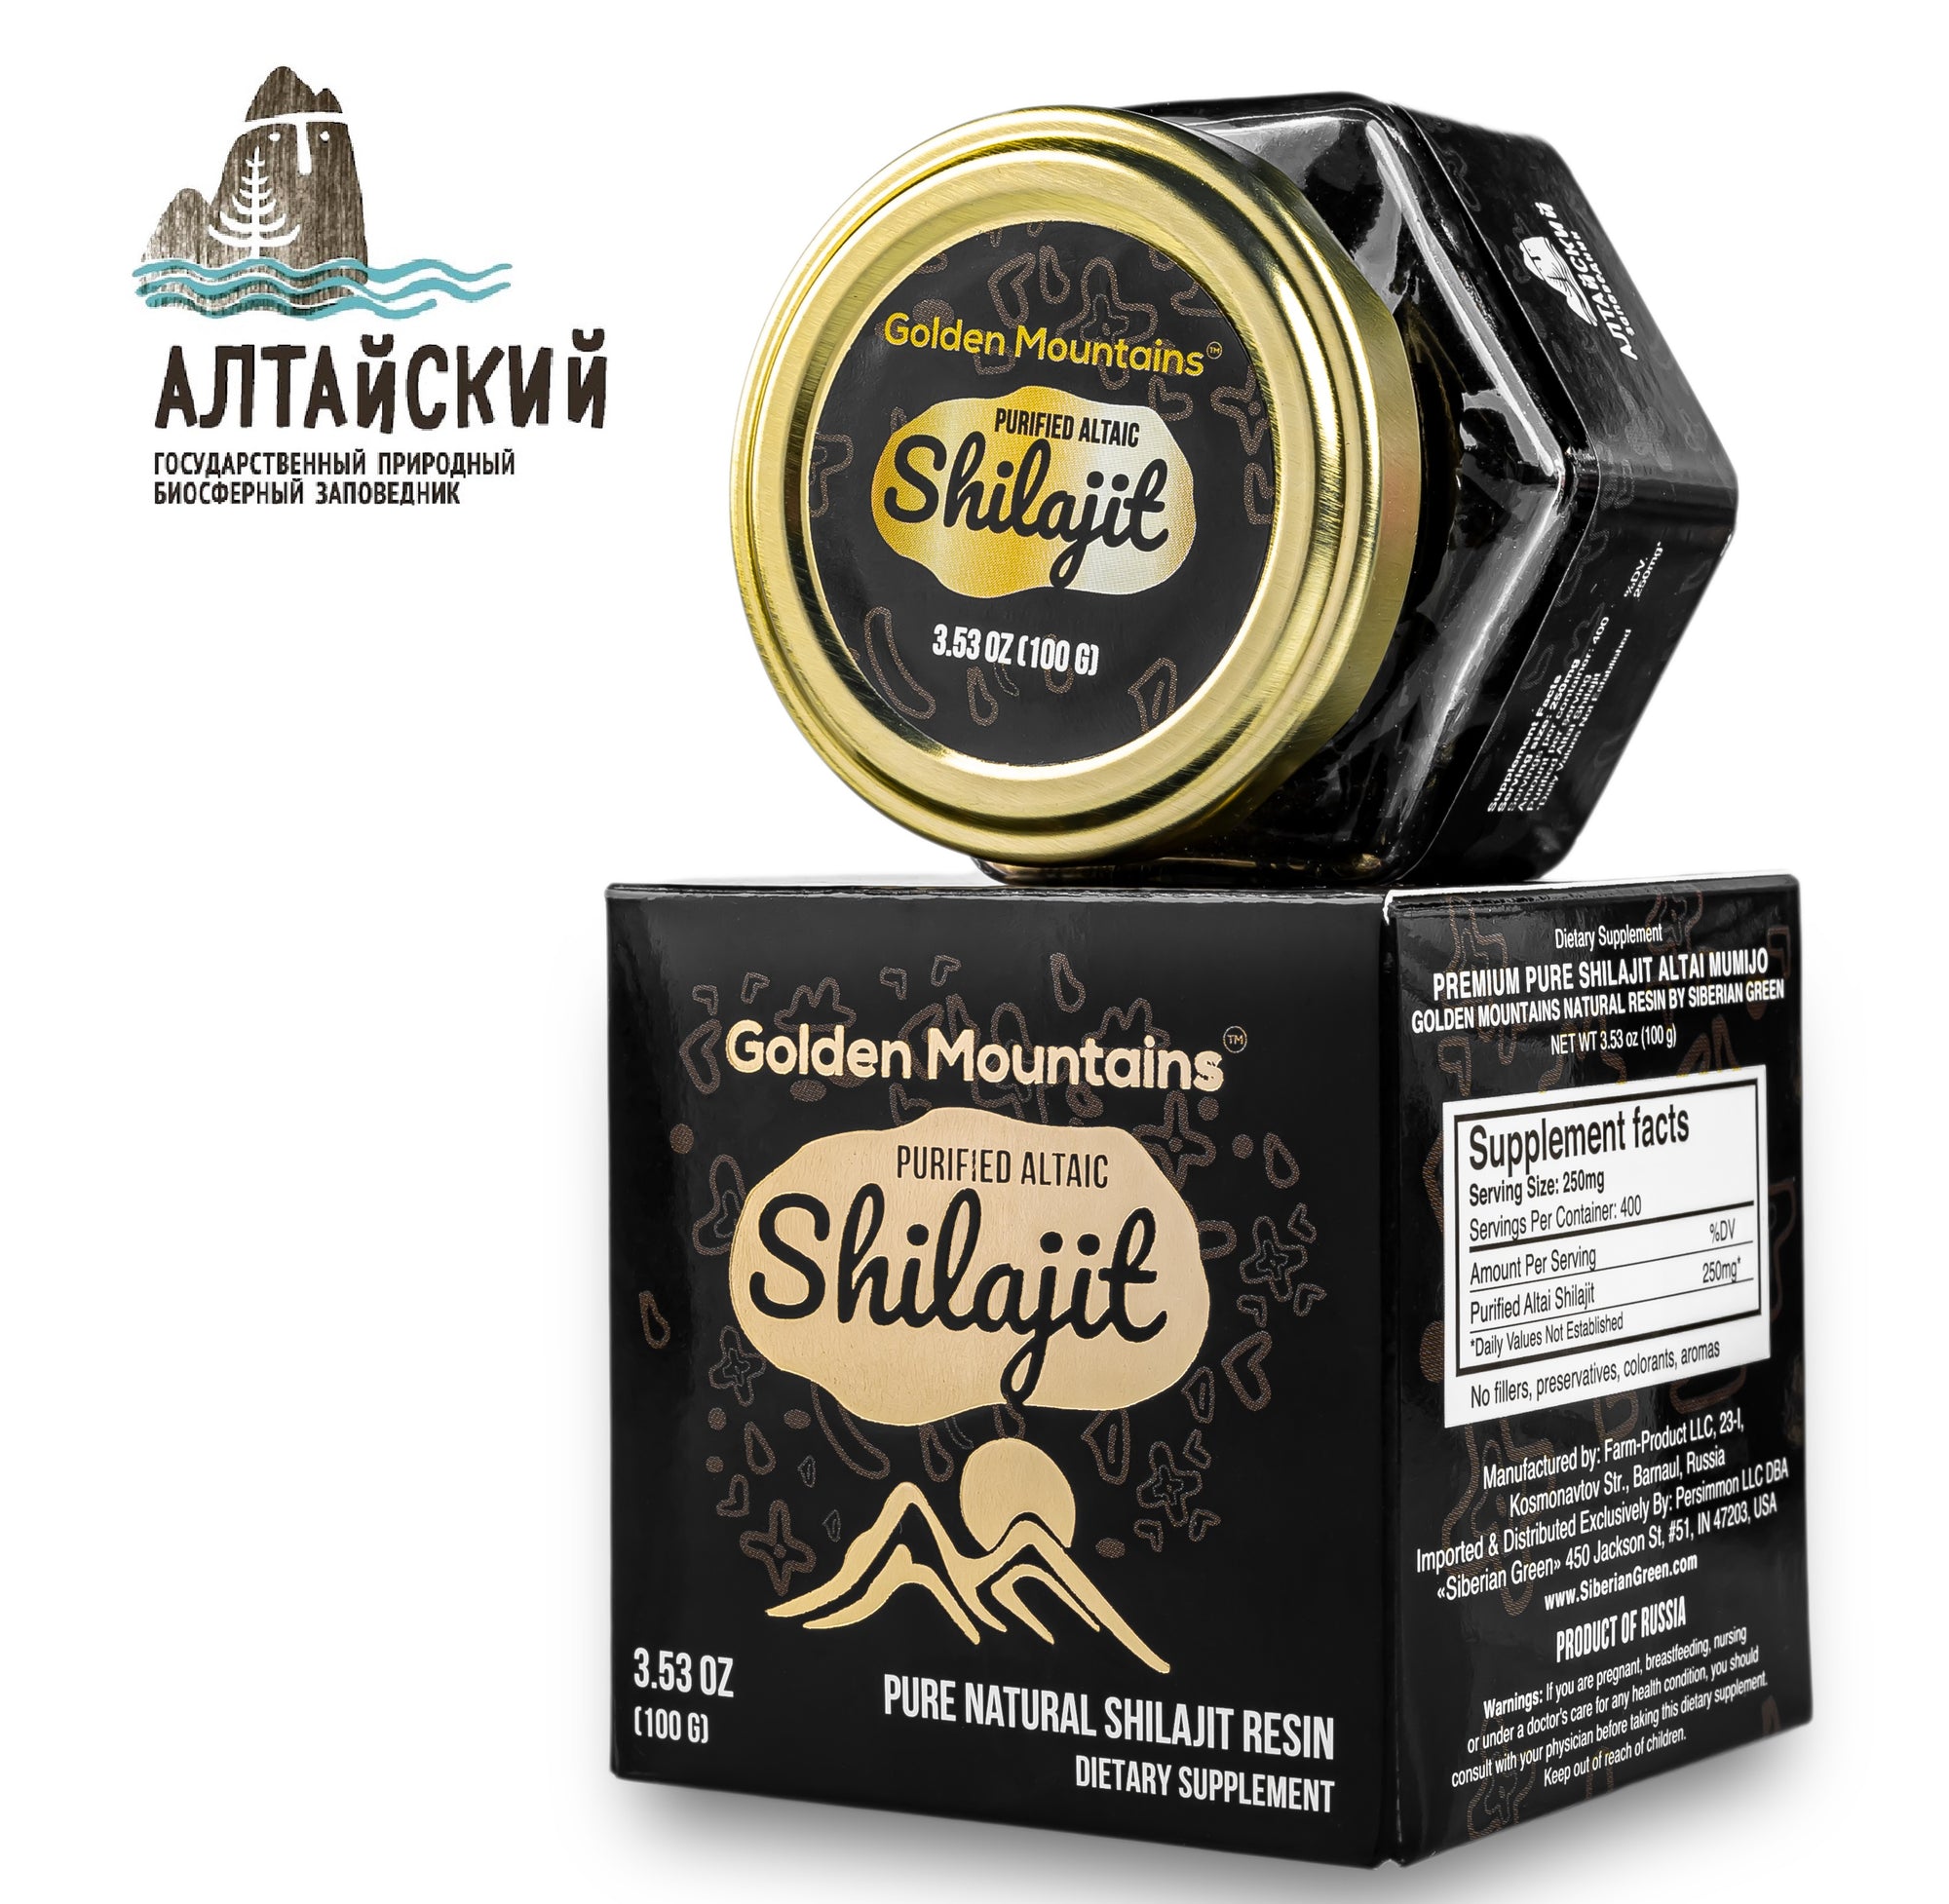 What type of tea is best to mix with Shilajit?